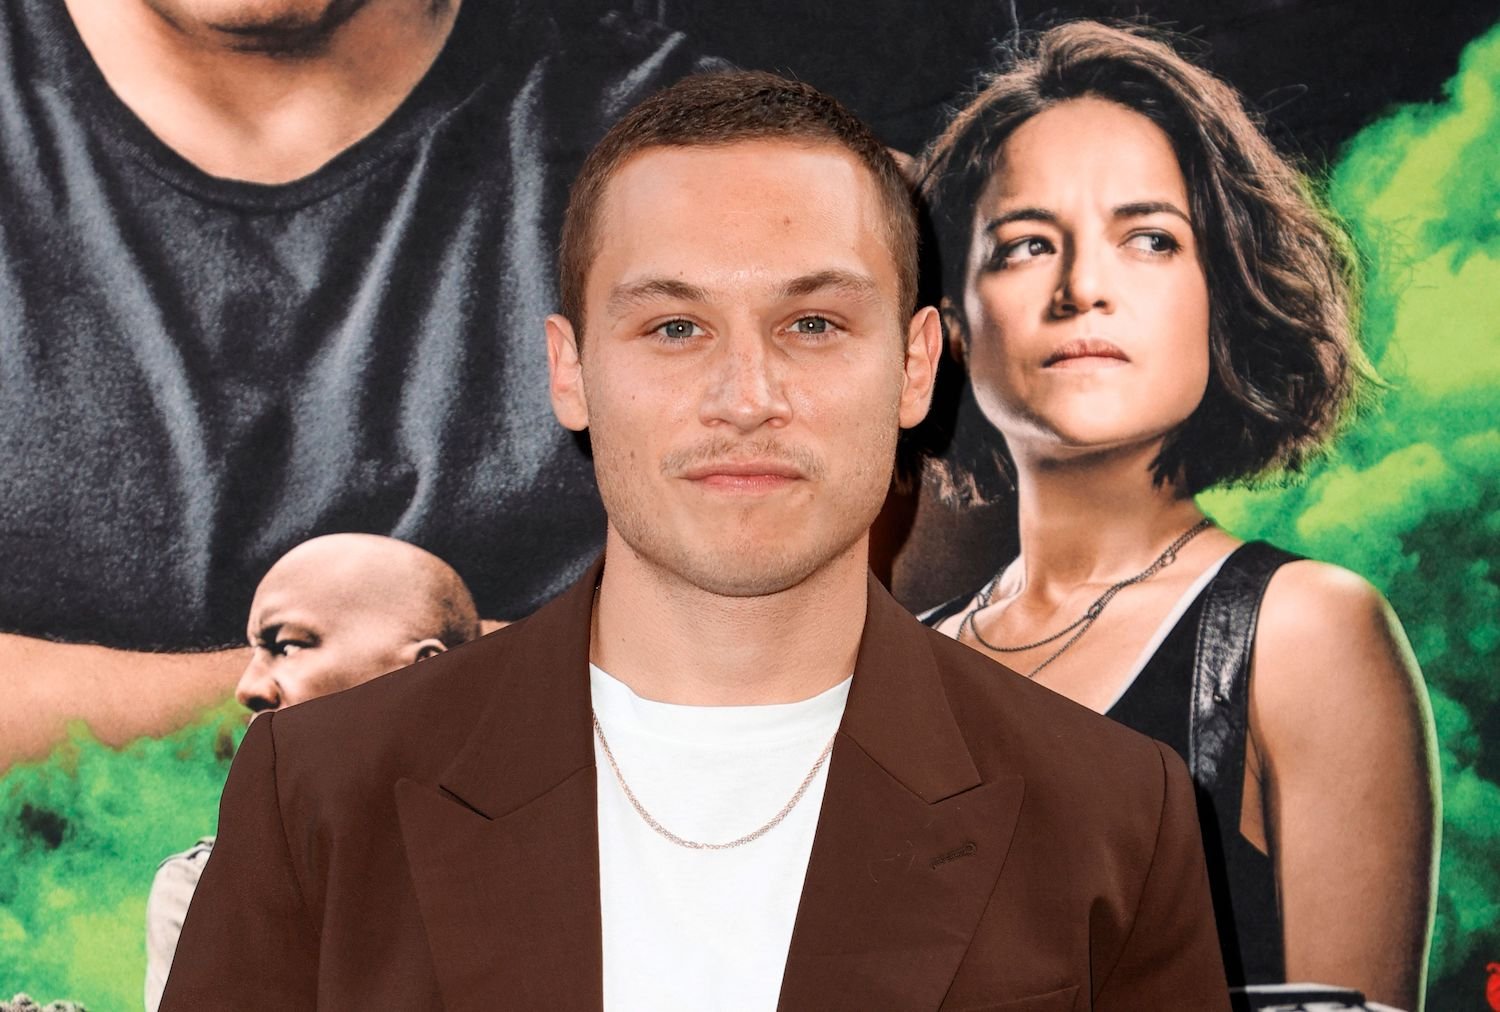 Finn Cole, actor playing Michael Gray in 'Peaky Blinders' Season 6, at a movie premiere